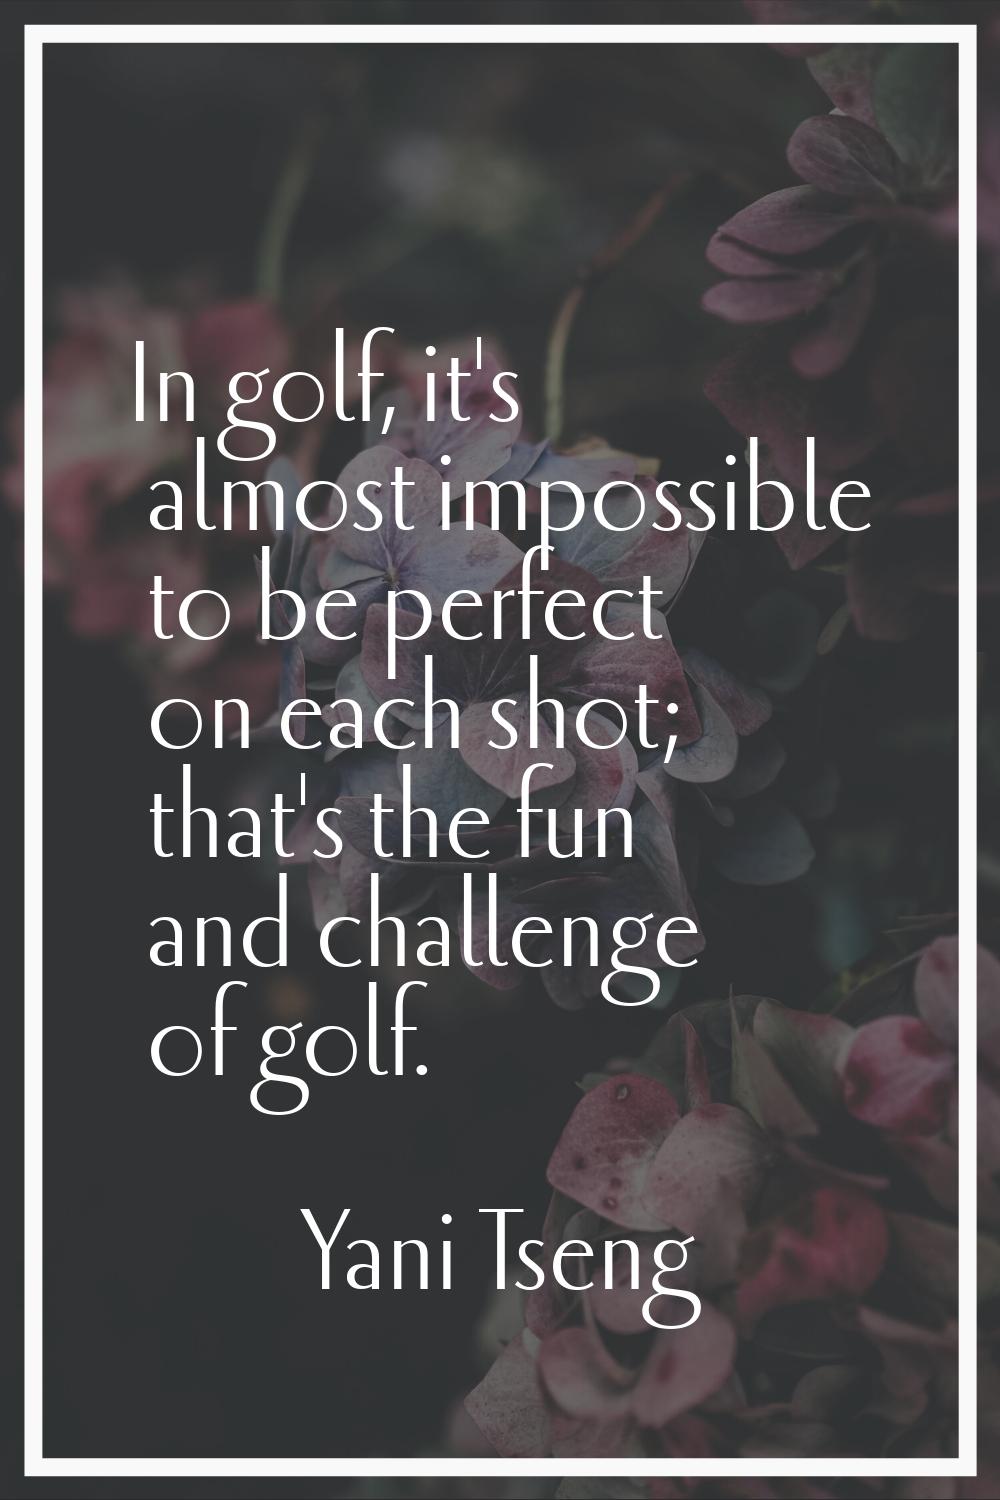 In golf, it's almost impossible to be perfect on each shot; that's the fun and challenge of golf.